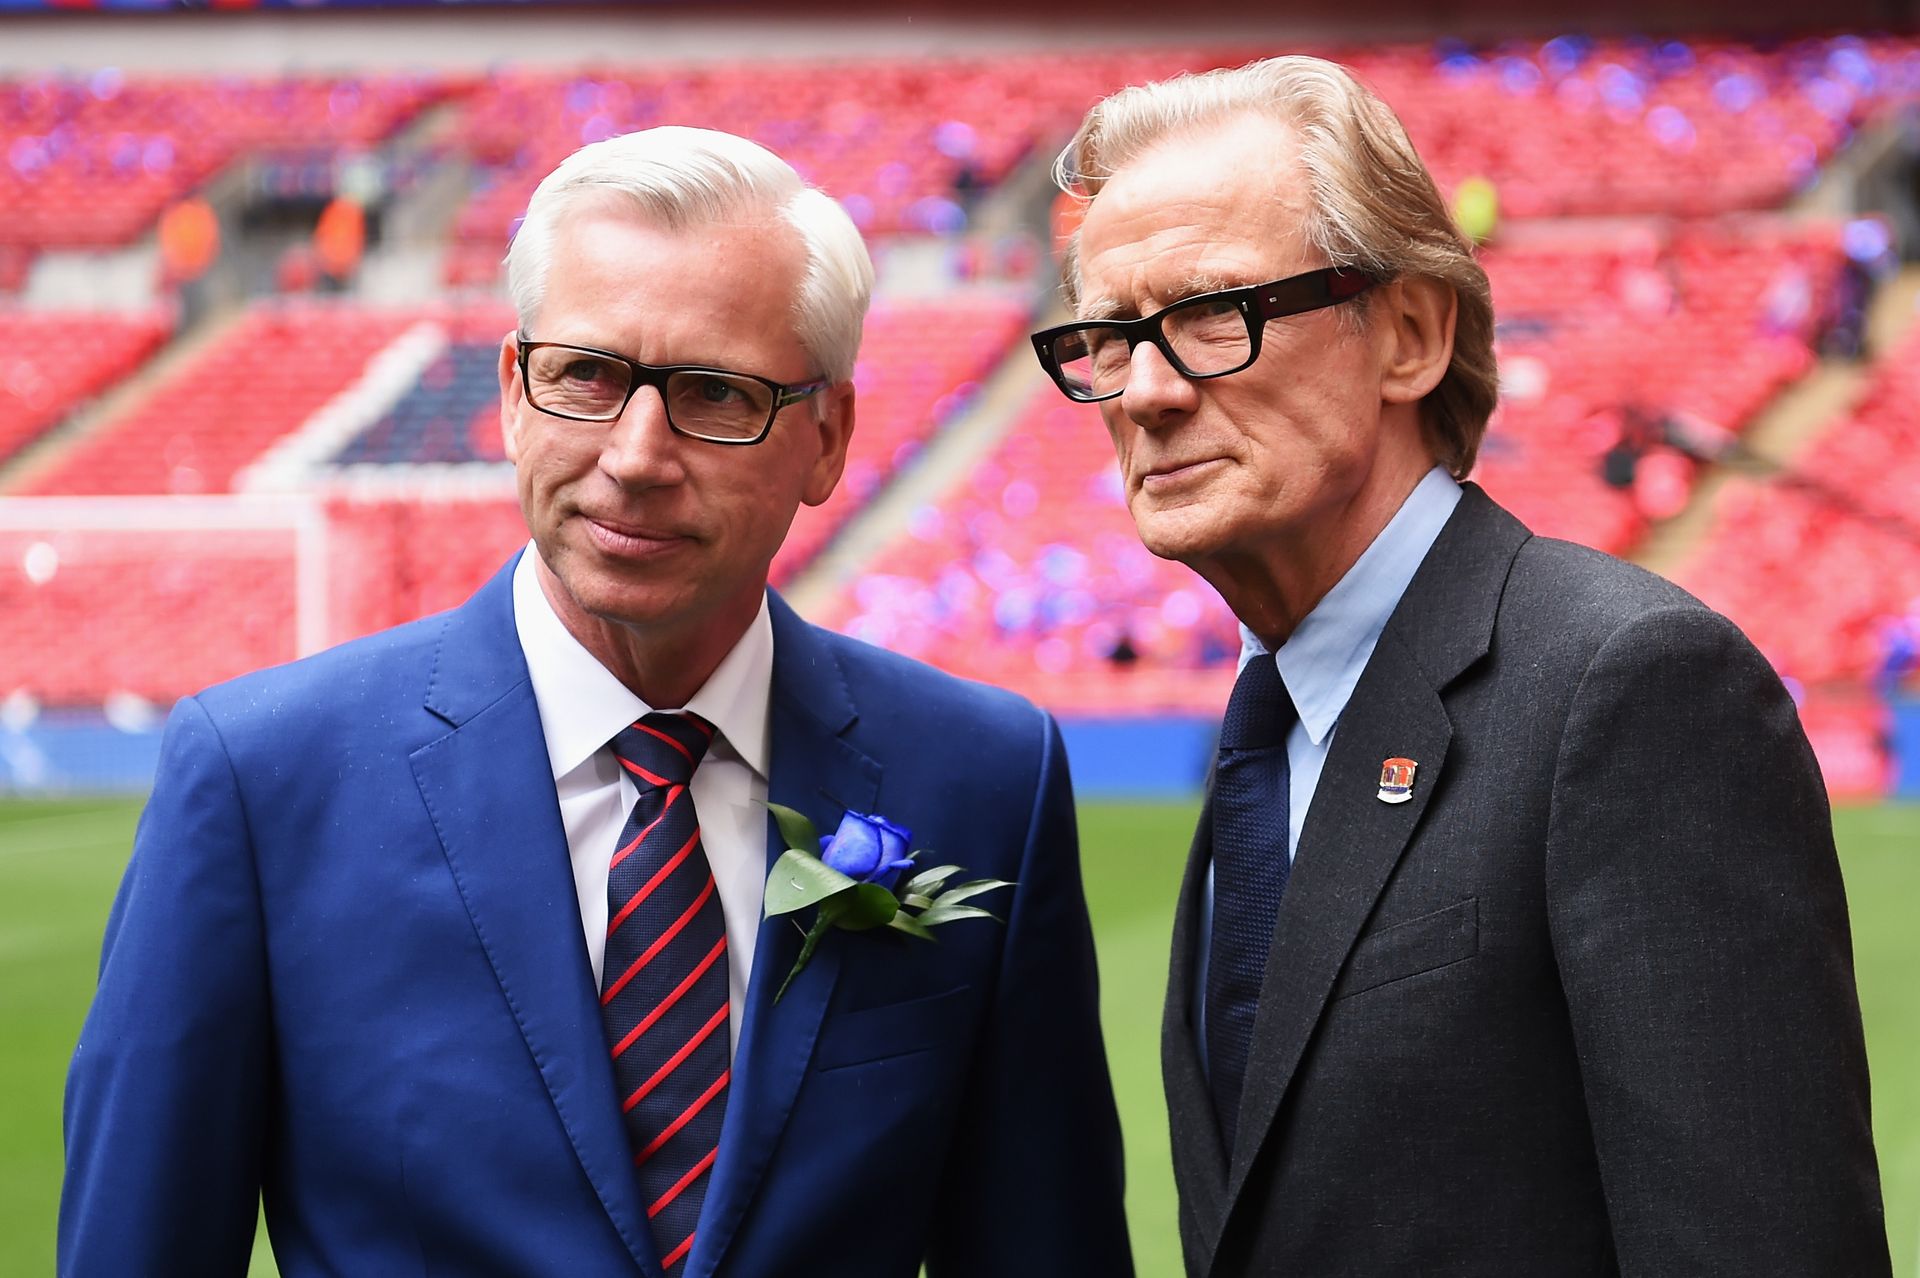 <p>                     Actor Bill Nighy is a lifelong Crystal Palace fan and has narrated a series of films looking back at the origins of the south London club.                   </p>                                      <p>                     The Love Actually star has also served as a patron of the CPSCC (Crystal Palace Children's Charity) and was congratulated by the club after receiving an Oscar nomination in 2023 for his role in Living.                   </p>